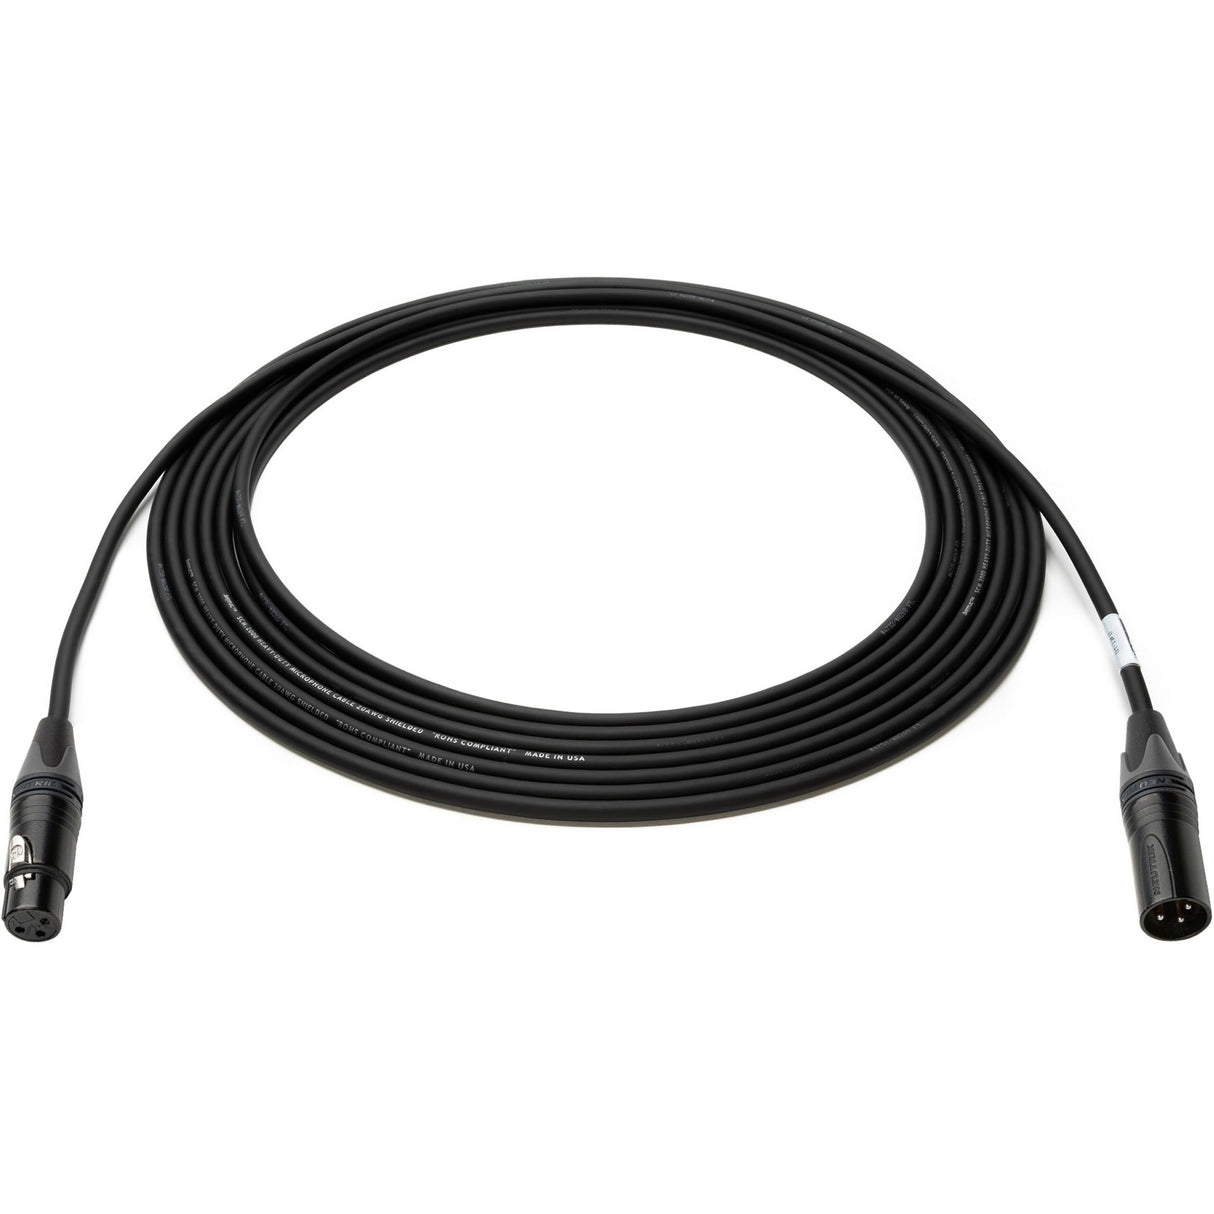 Sescom SCTX-XXJ-035 Touring Grade Microphone Cable with Neutrik Black and Silver 3-Pin XLR Connectors, 35-Foot